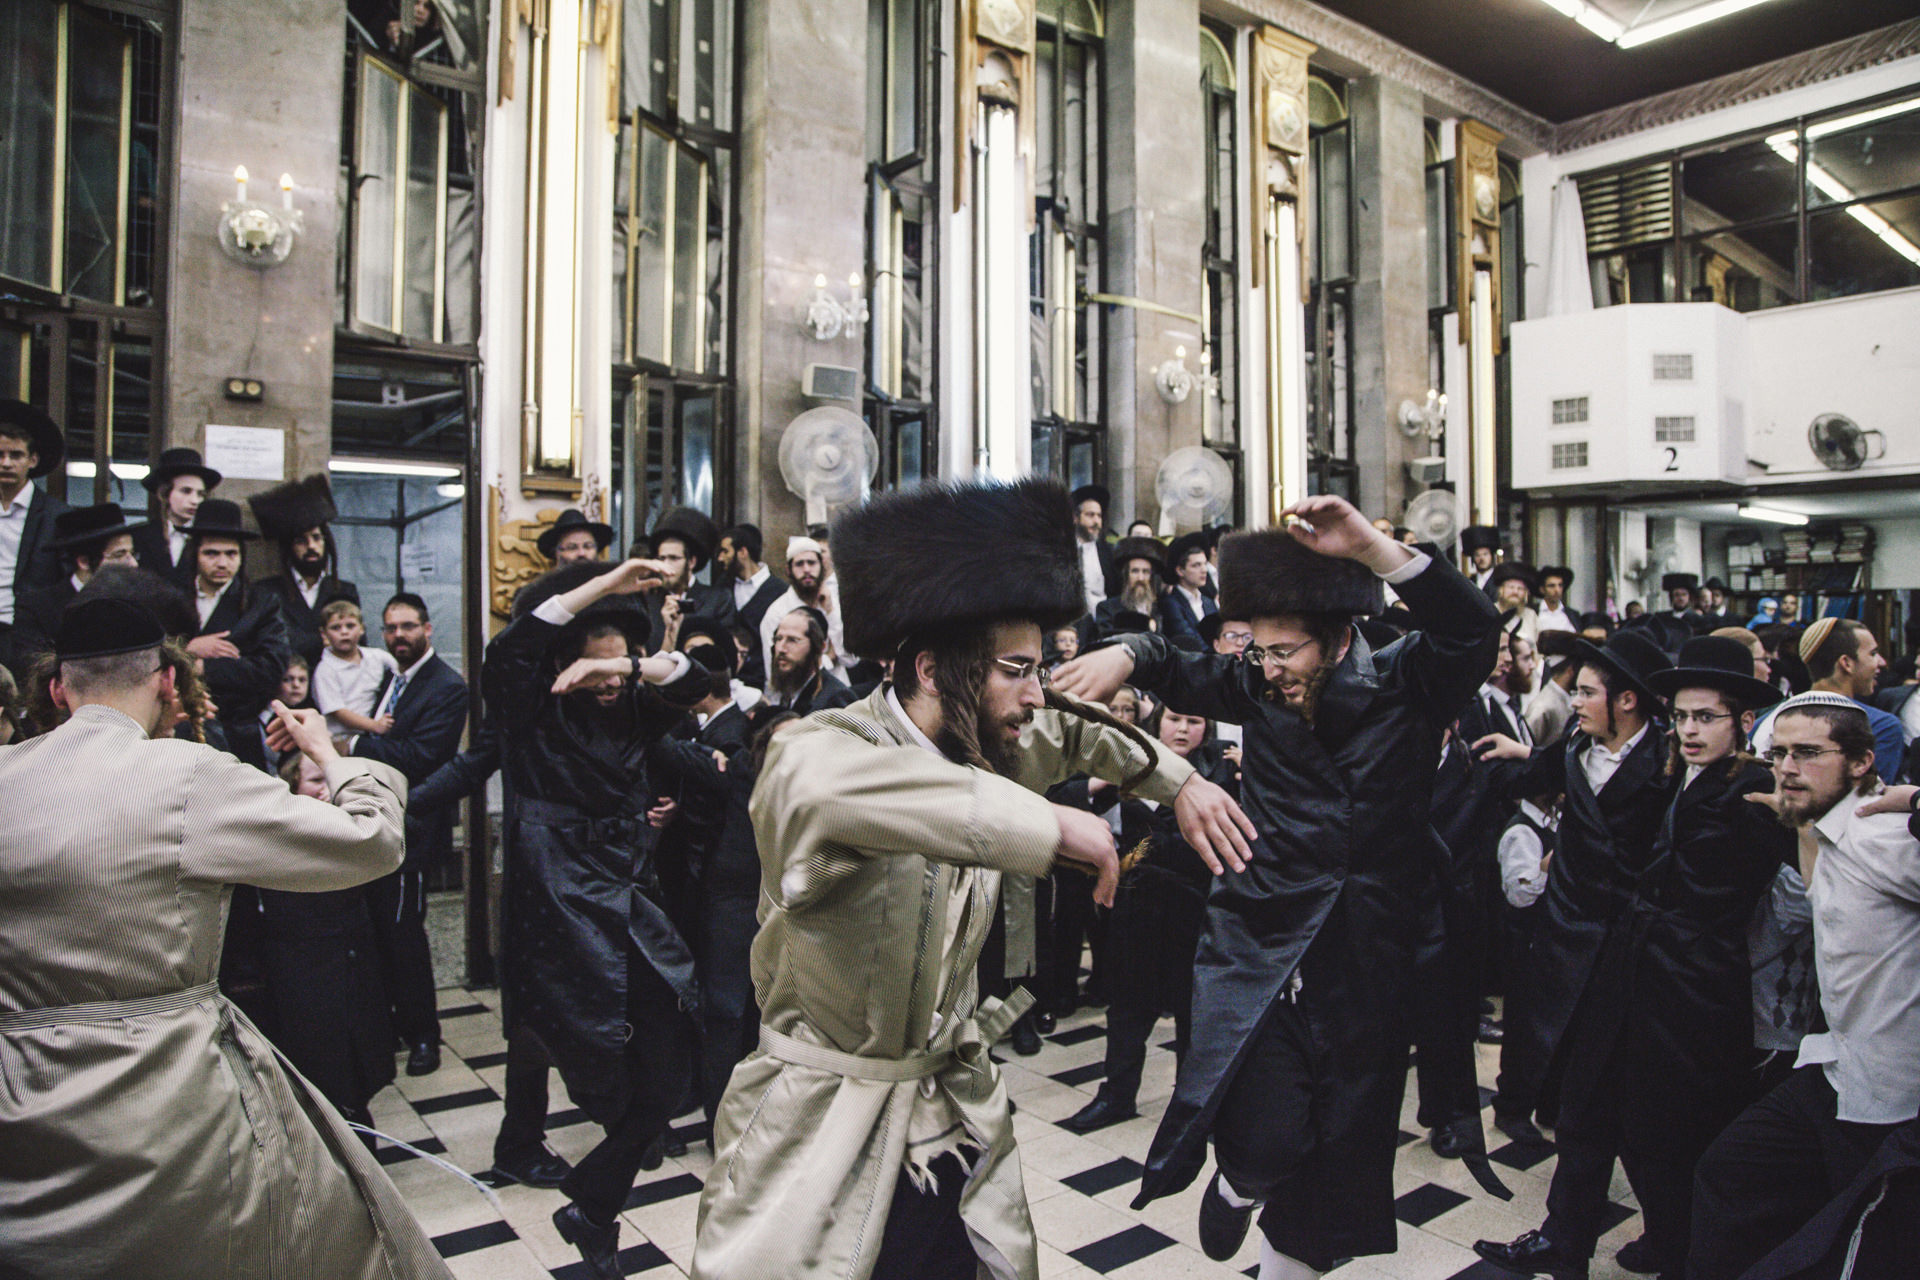 Ultra-Orthodox people dance in the feast of the torah, a sacred celebration in a synagogue in Mea Shearim, the orthodox neighborhood in Jerusalem.